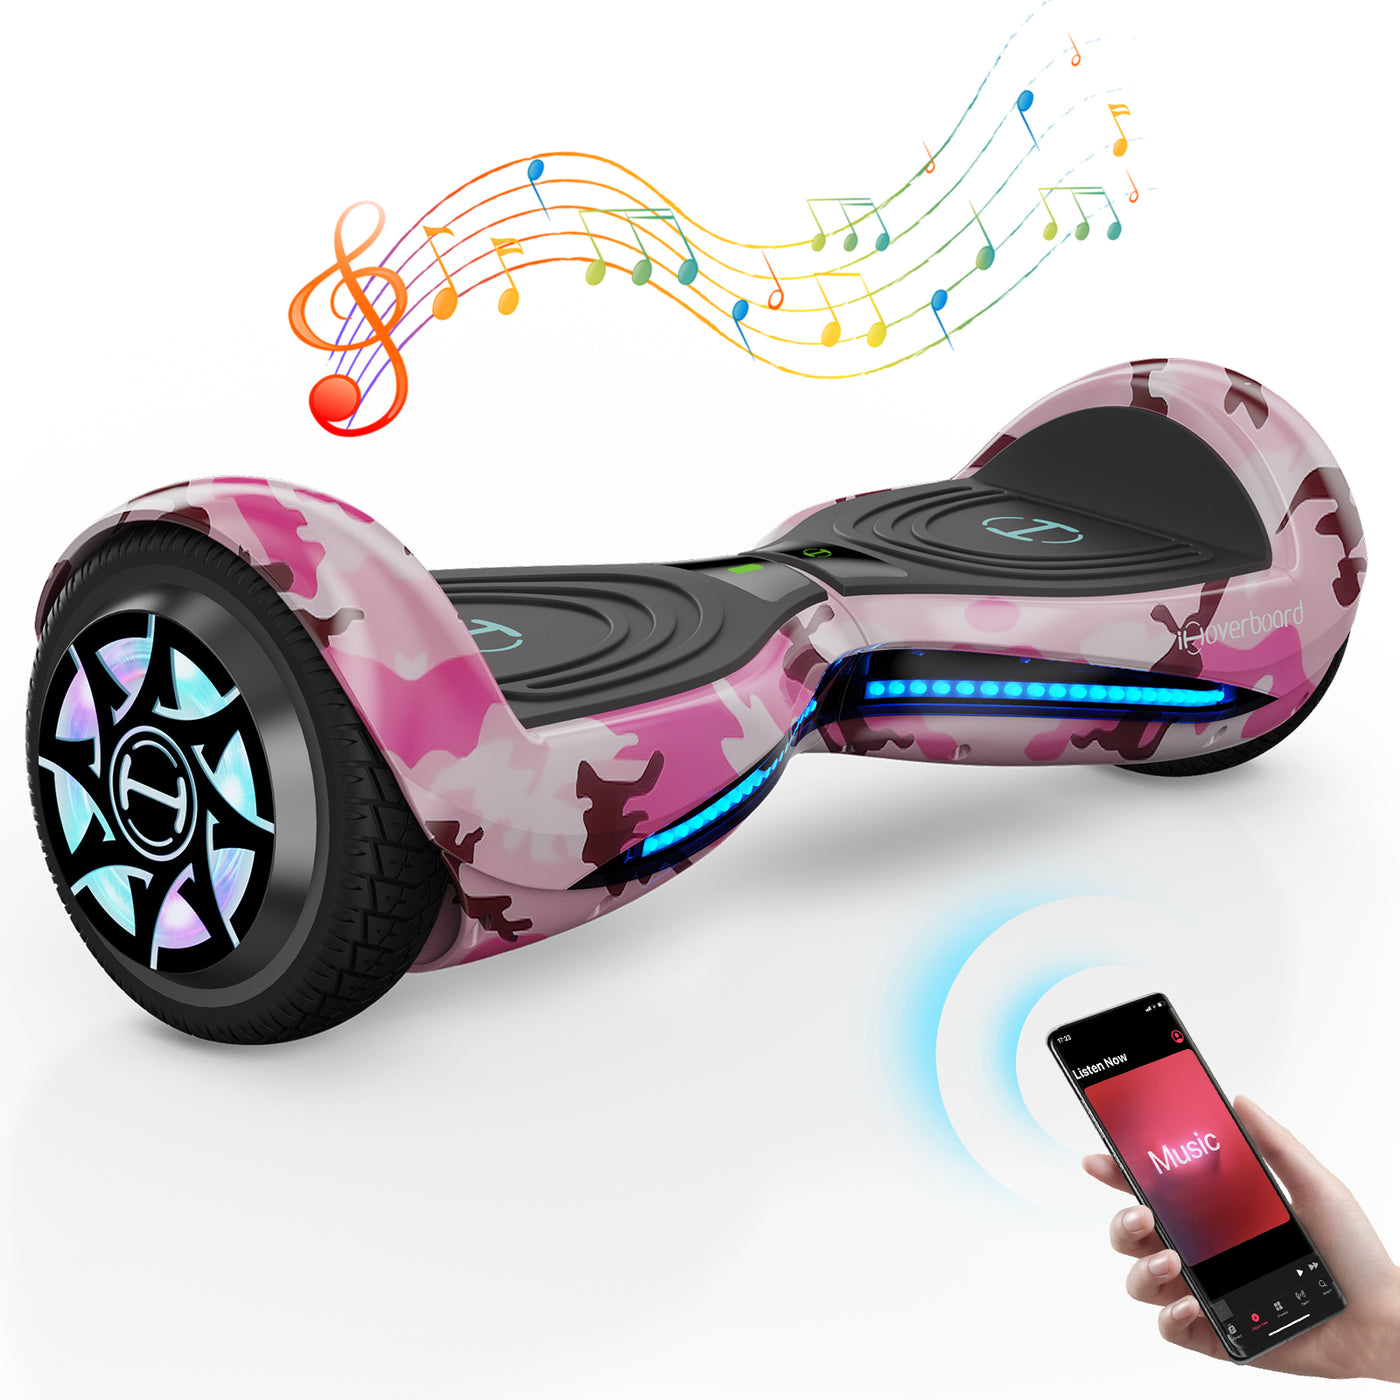 iHoverboard H2 Pink Self Balancing Hoverboard with Dual 350W Motor (700W)